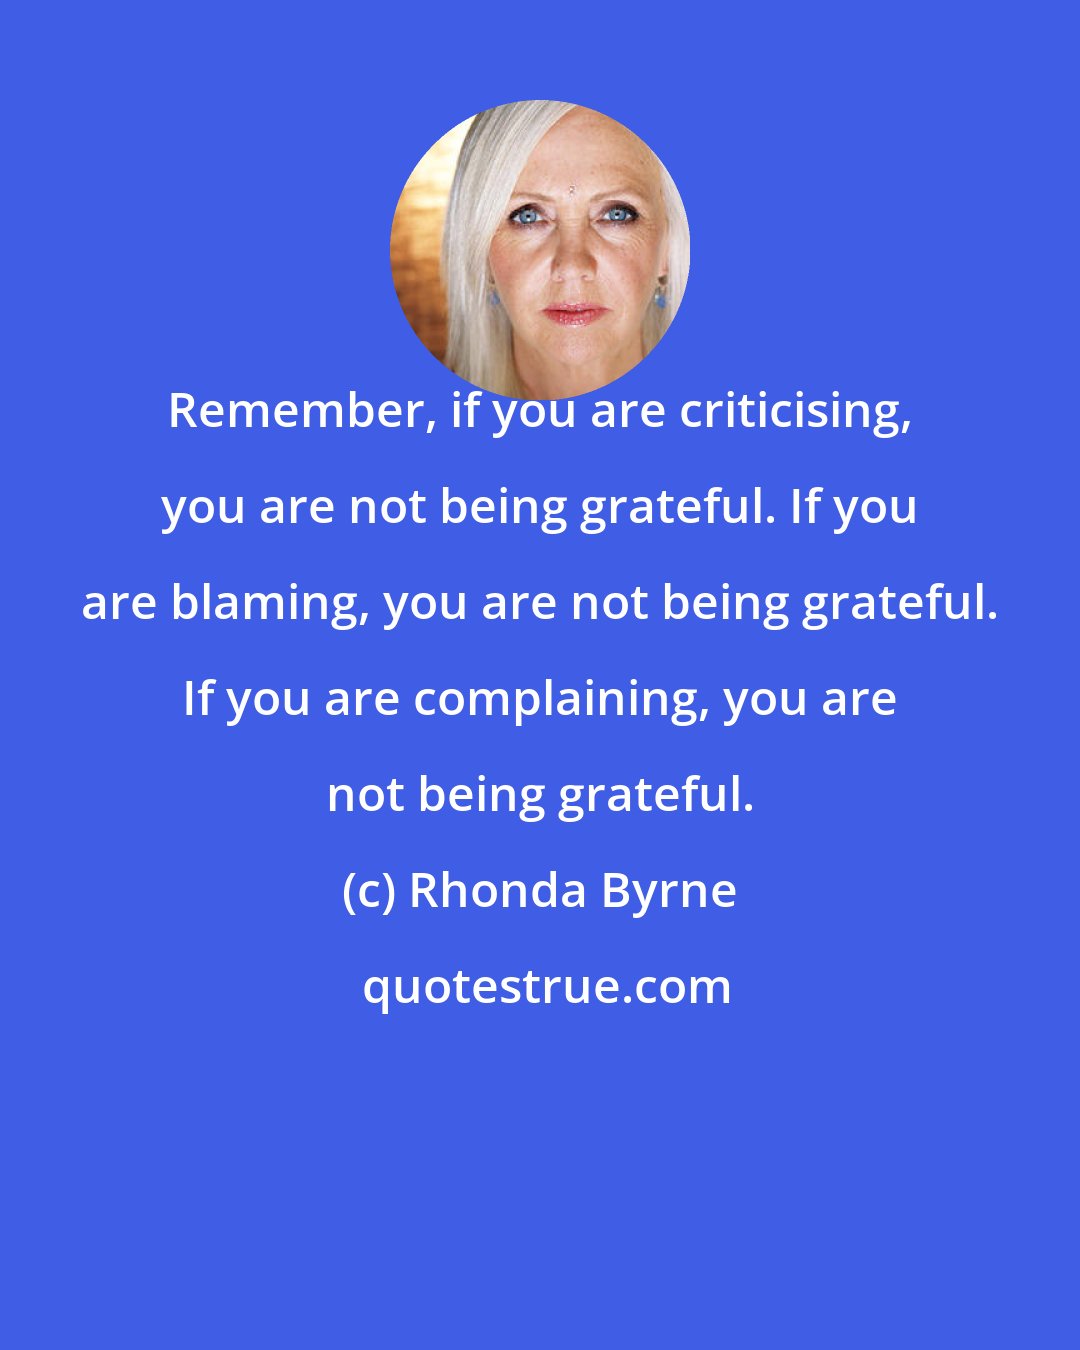 Rhonda Byrne: Remember, if you are criticising, you are not being grateful. If you are blaming, you are not being grateful. If you are complaining, you are not being grateful.